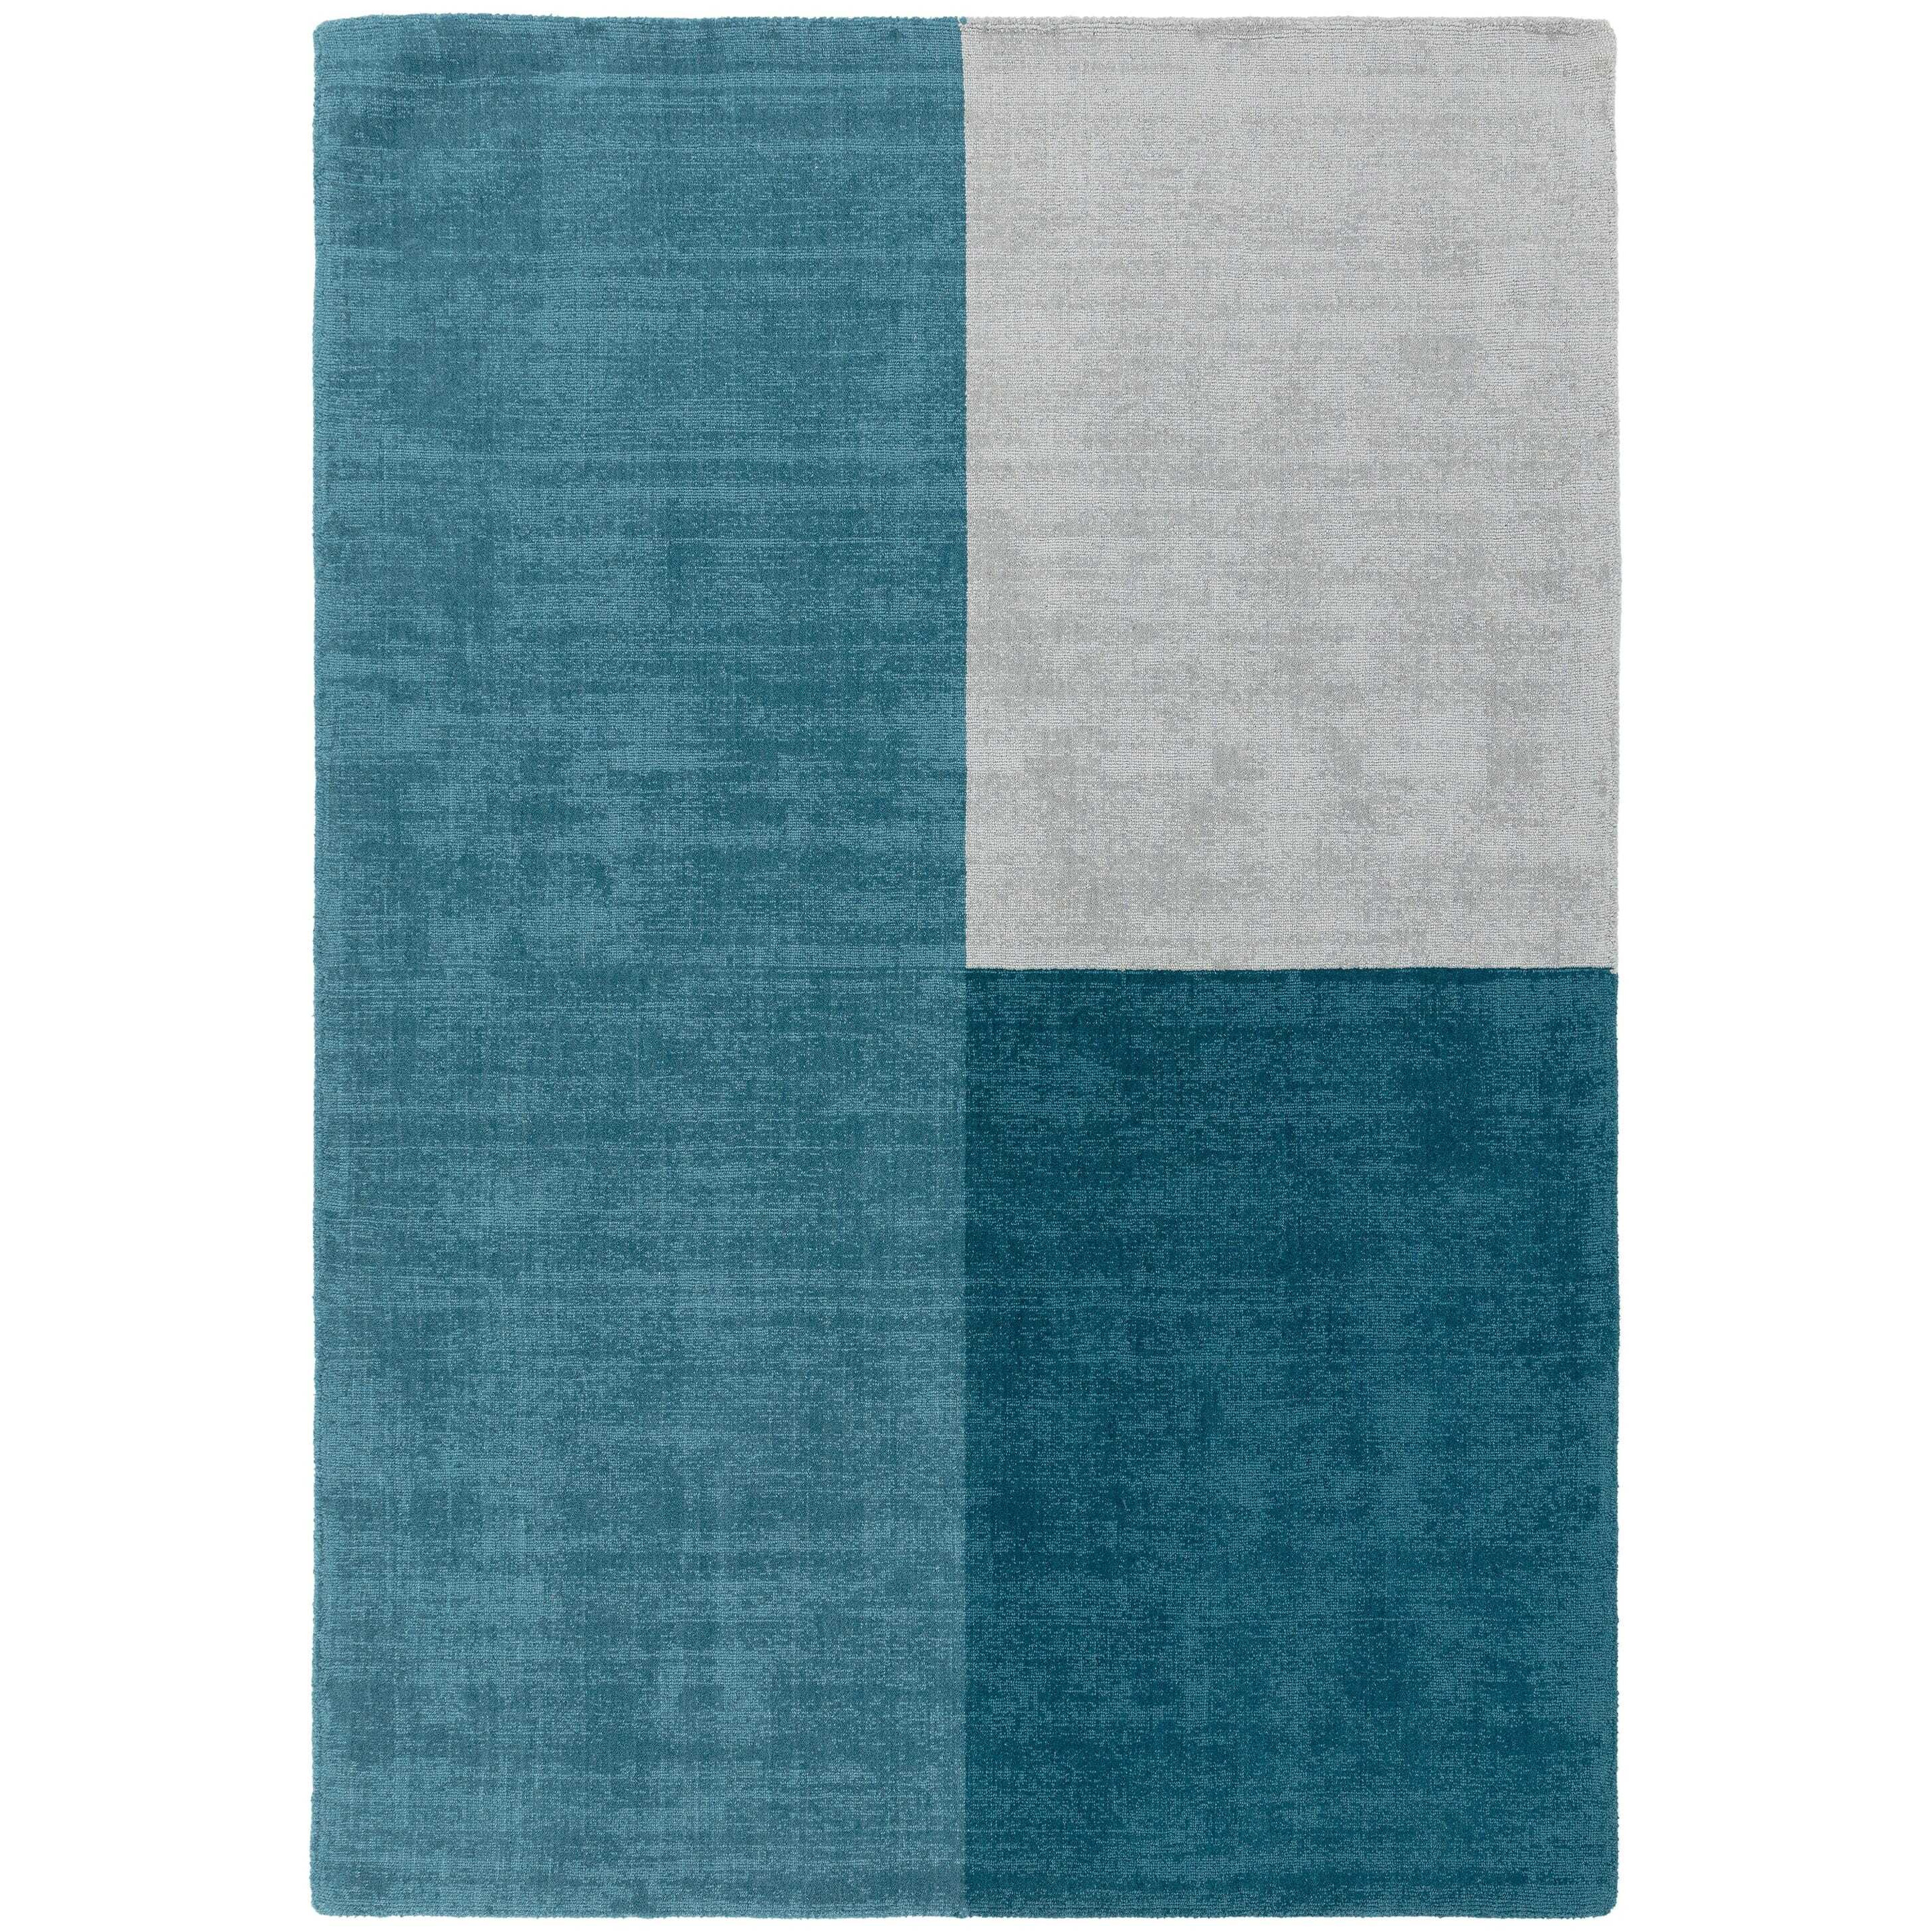 Asiatic Carpets Blox Hand Woven Rug Teal - 200 x 300cm - image 1